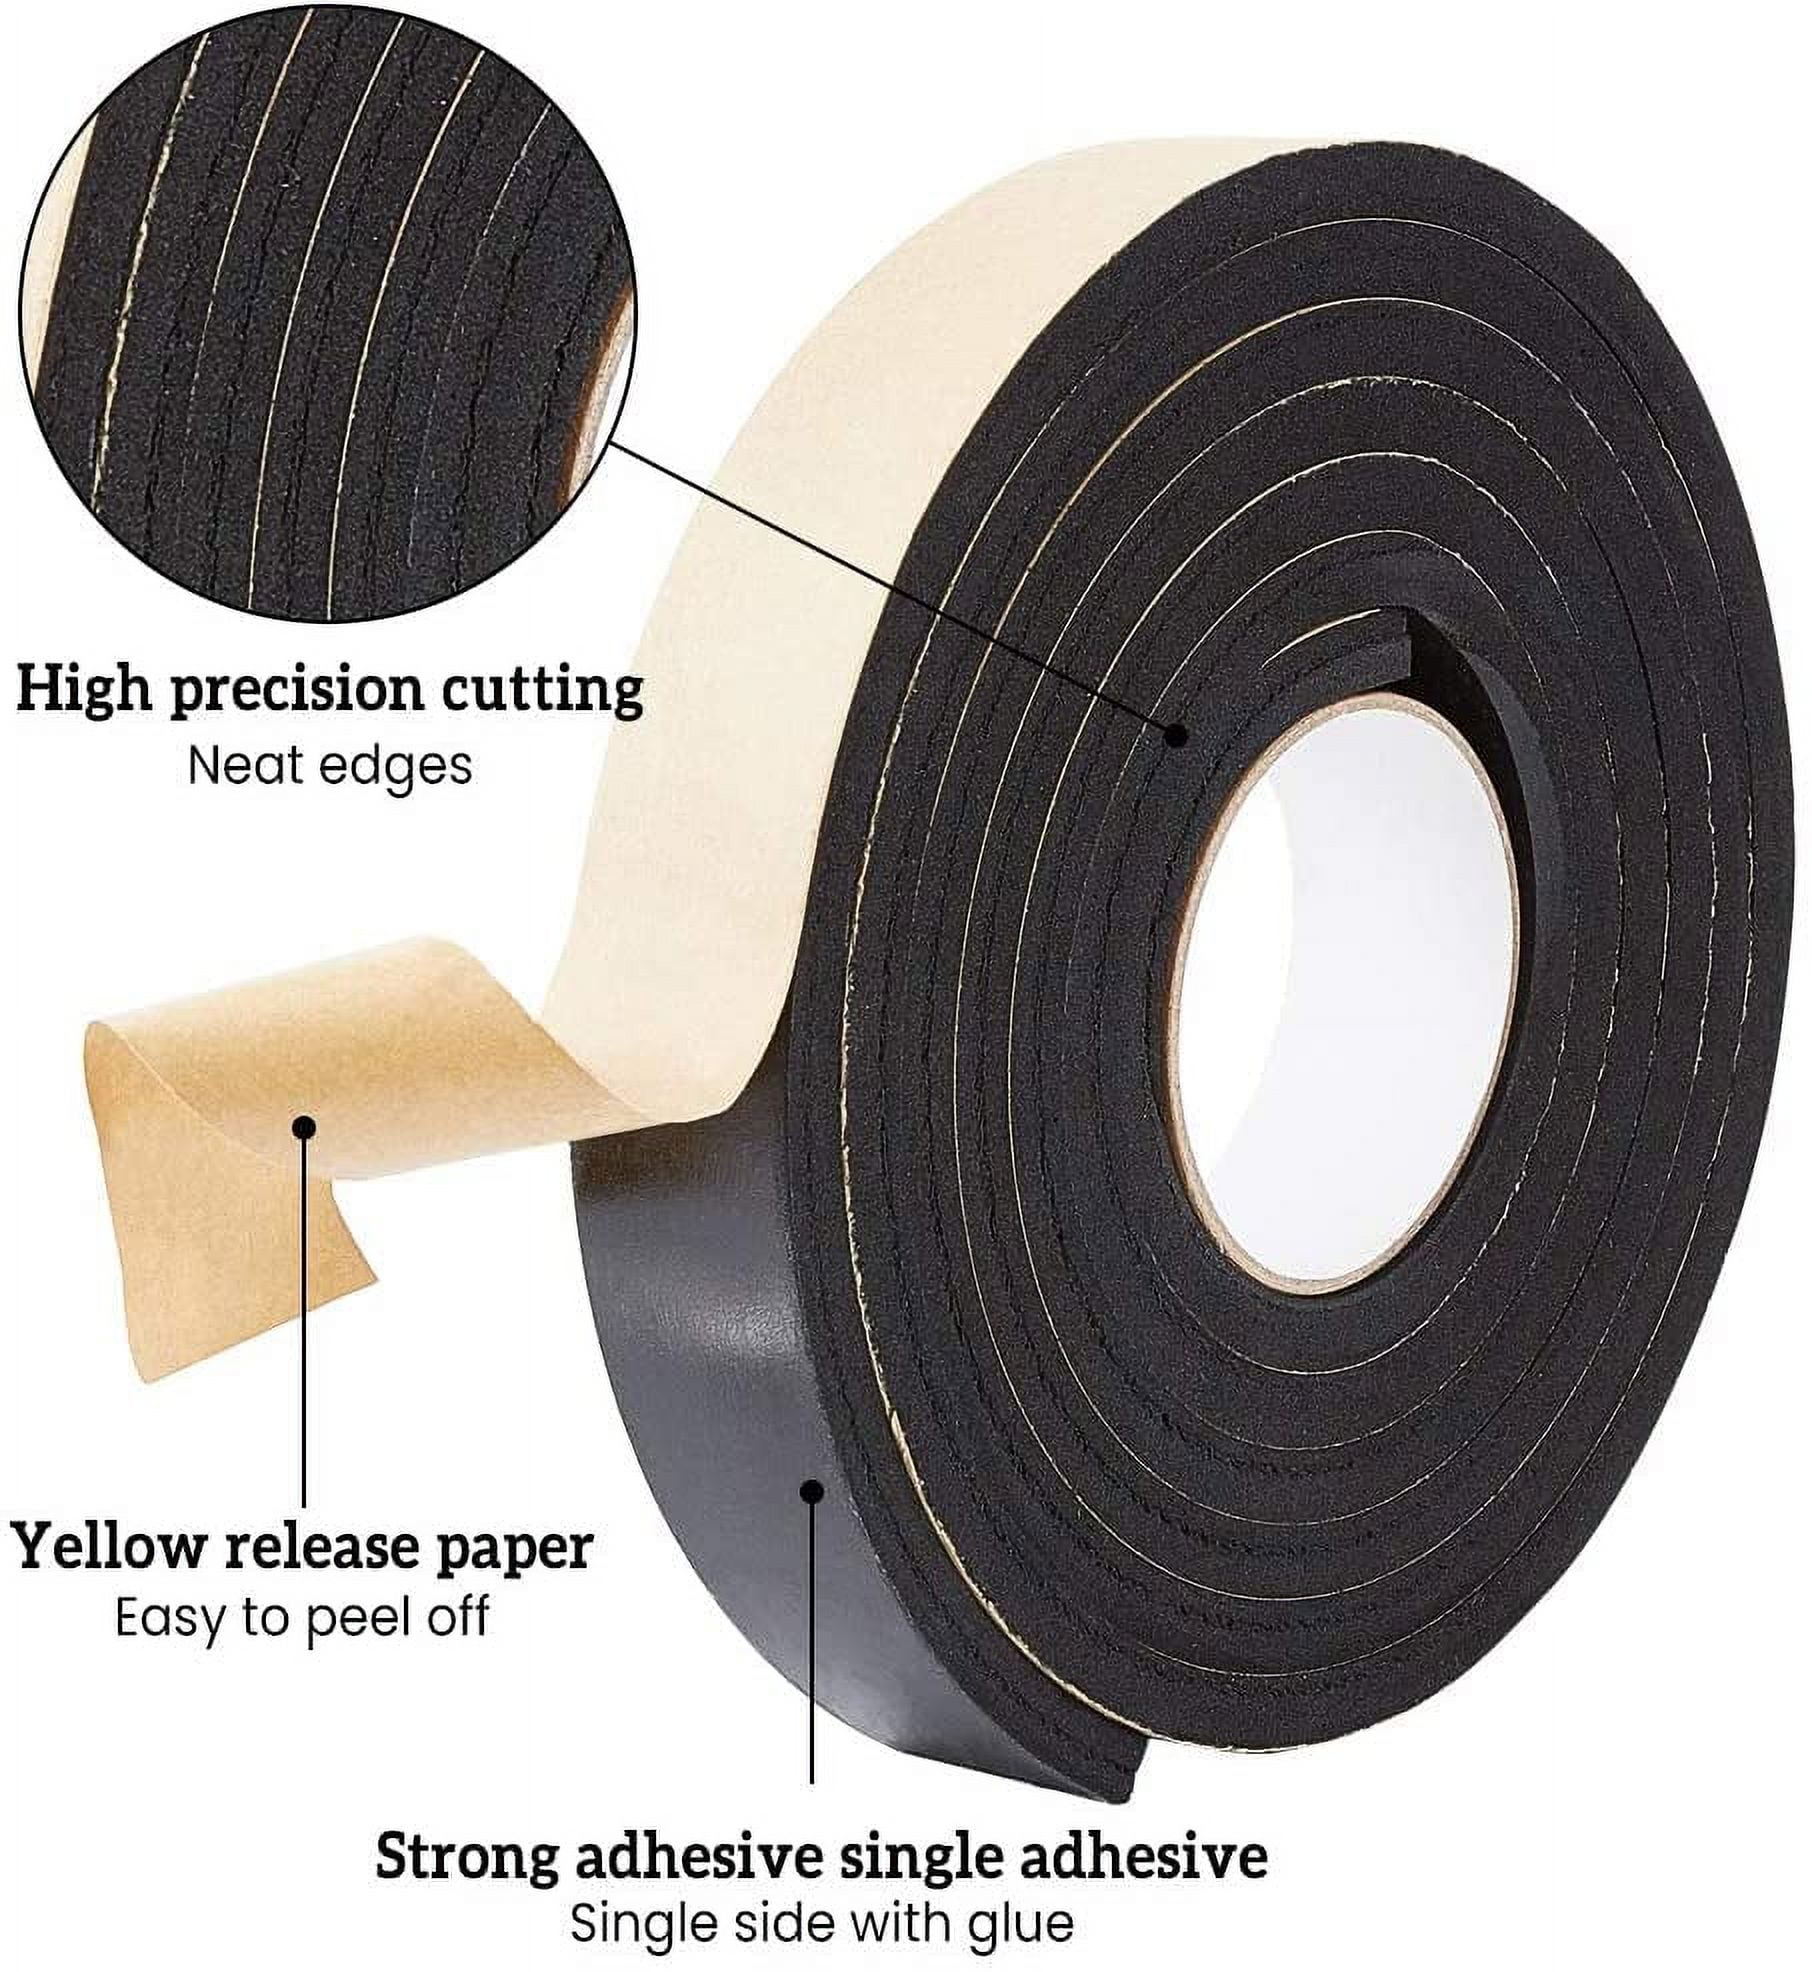 Covidien Dover - 1-sided Adhesive Foam Strip